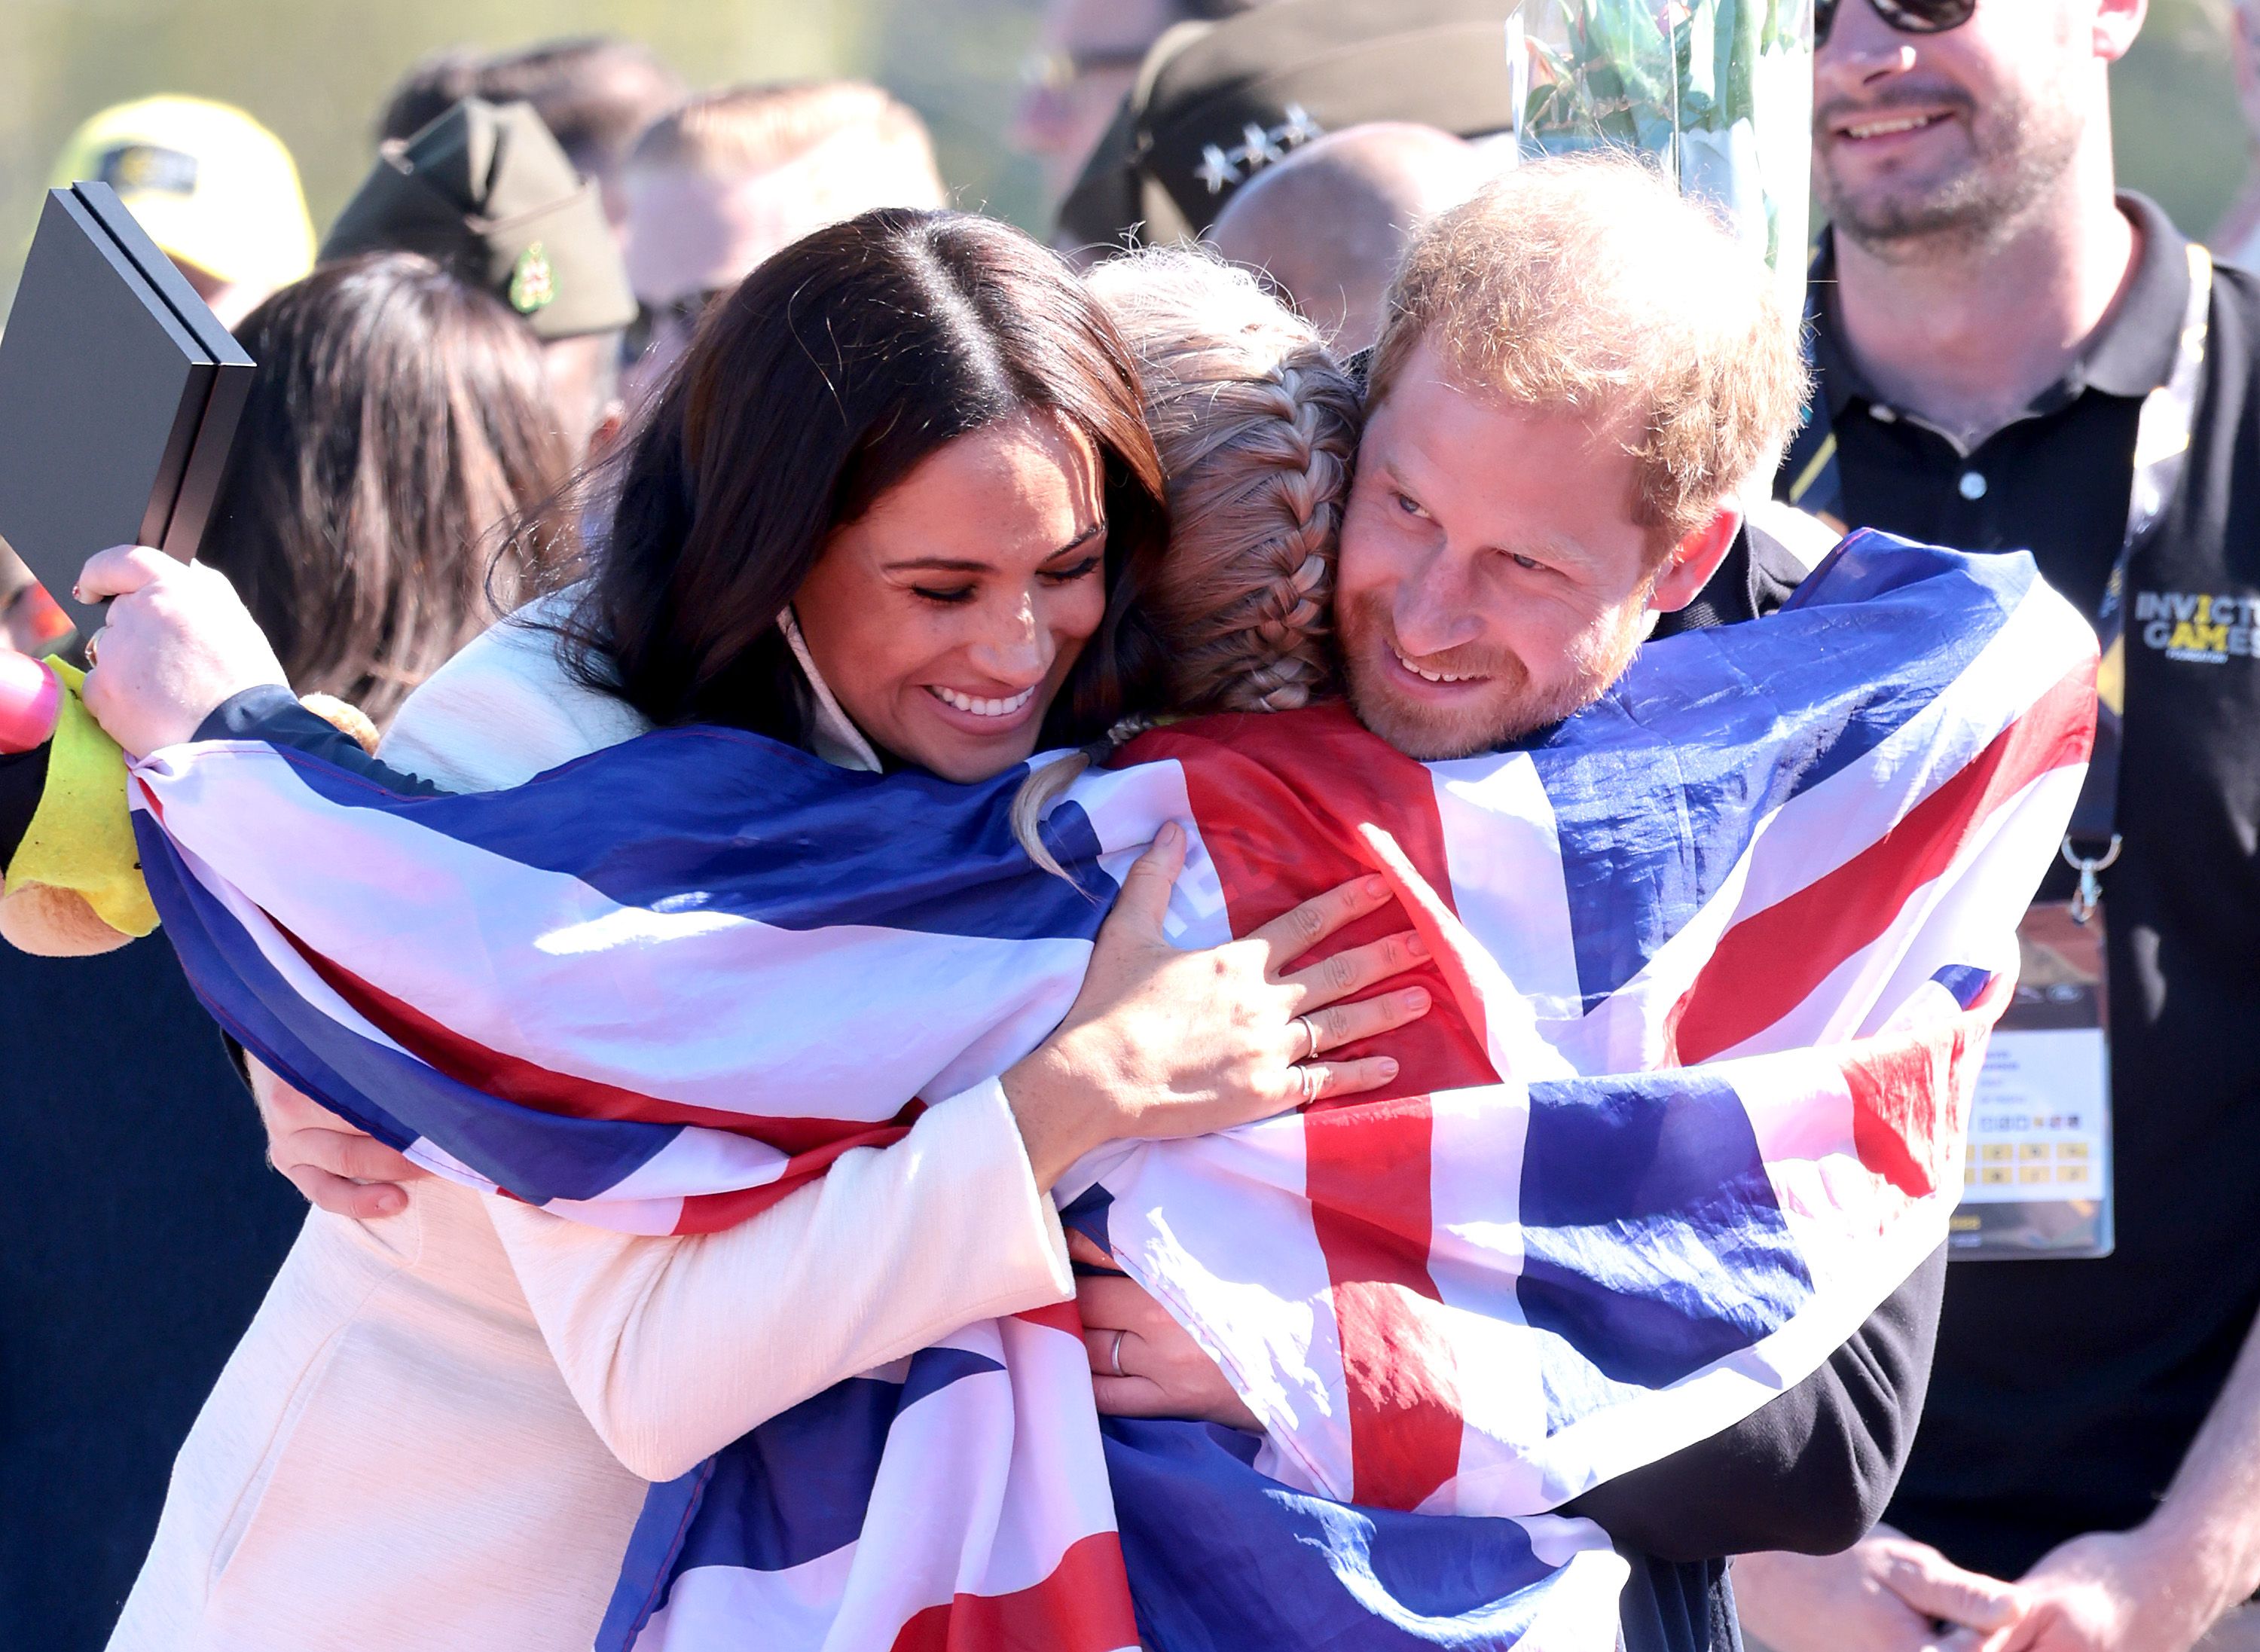 Prince Harry and Meghan Markle hugging an athlete